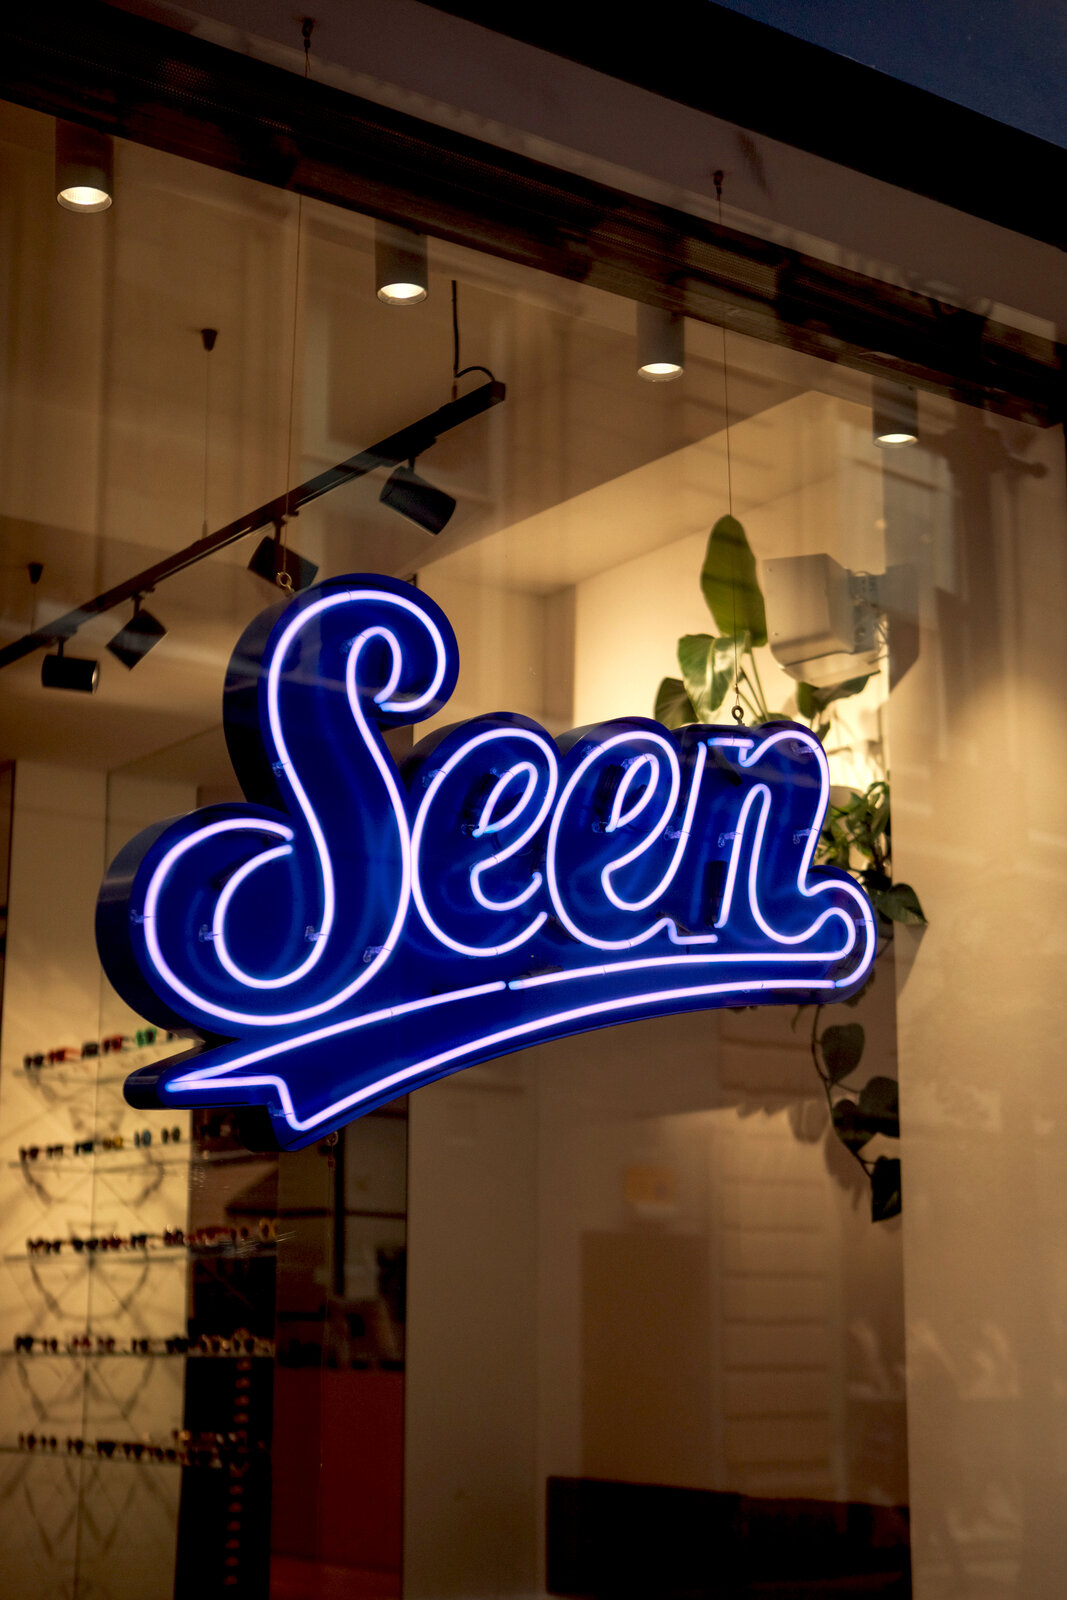 Seen Opticians - Creating a modern Manchester storefront featuring real neon signs and authentic hand painted sign writing